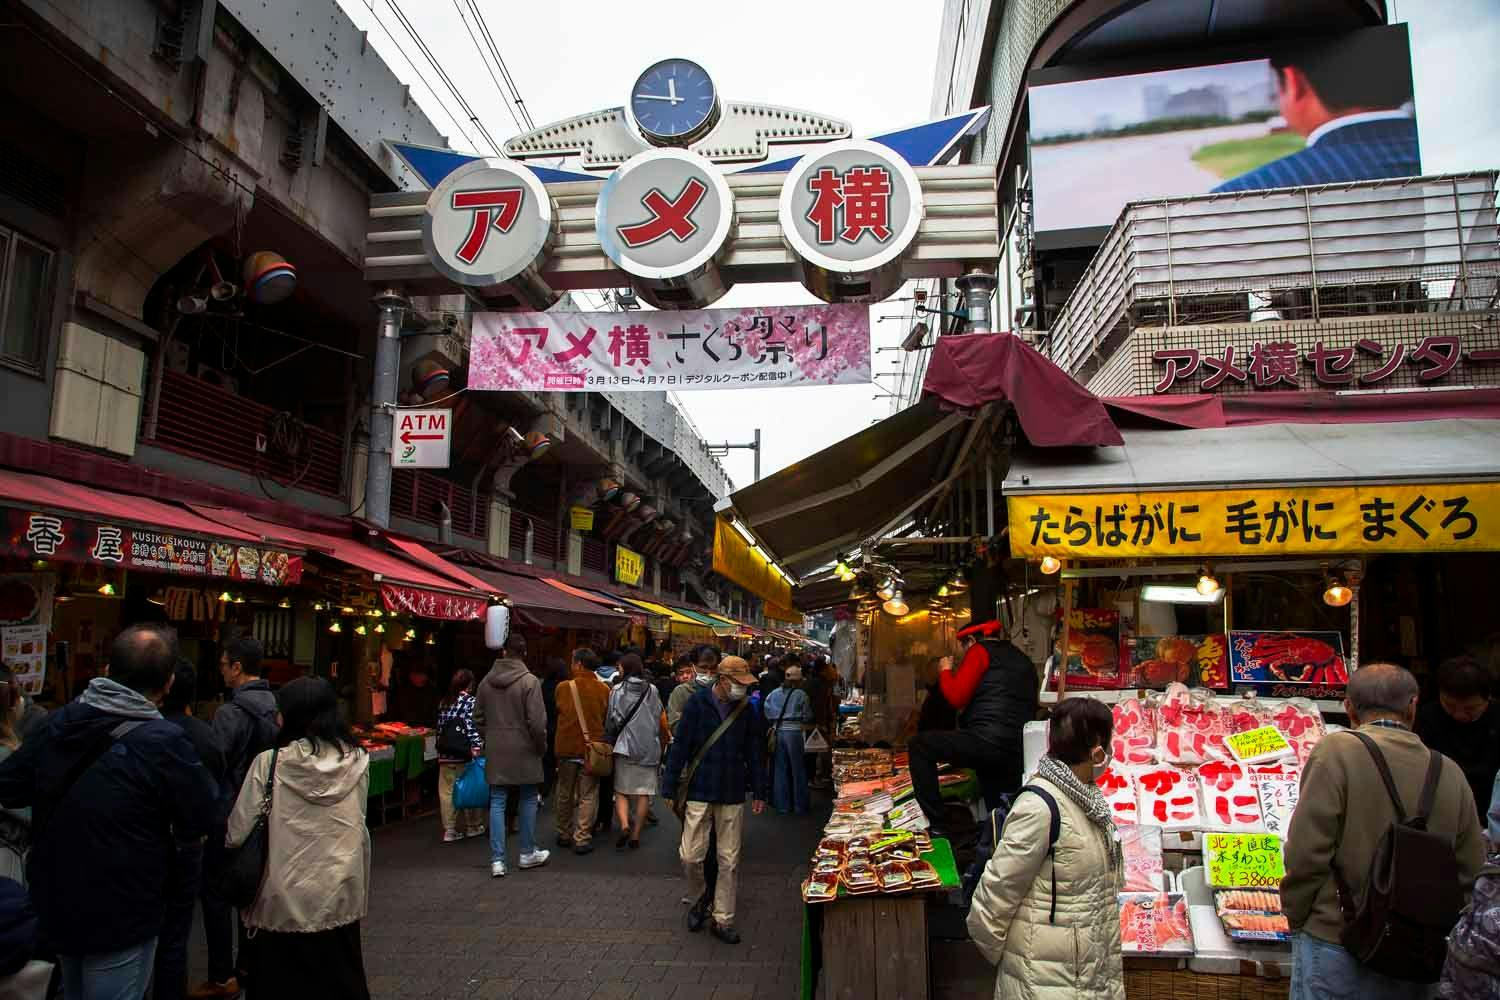 Ameyoko market in Tokyo. A great place for shopping. Photo source: James Saunders-Wyndham